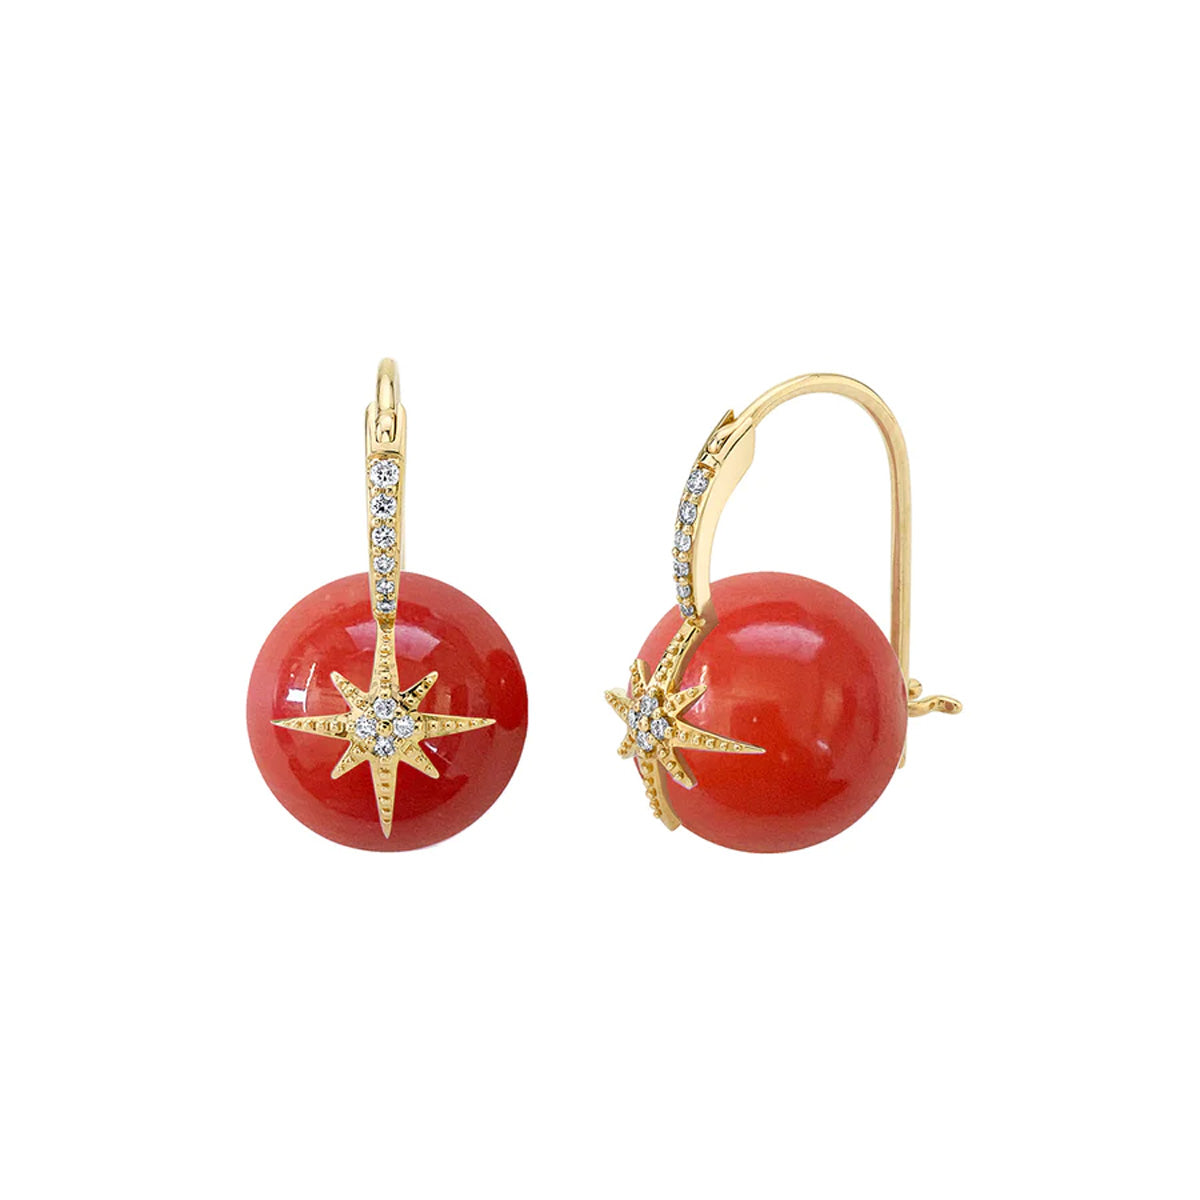 Coral Beads with Diamond Starburst Earrings